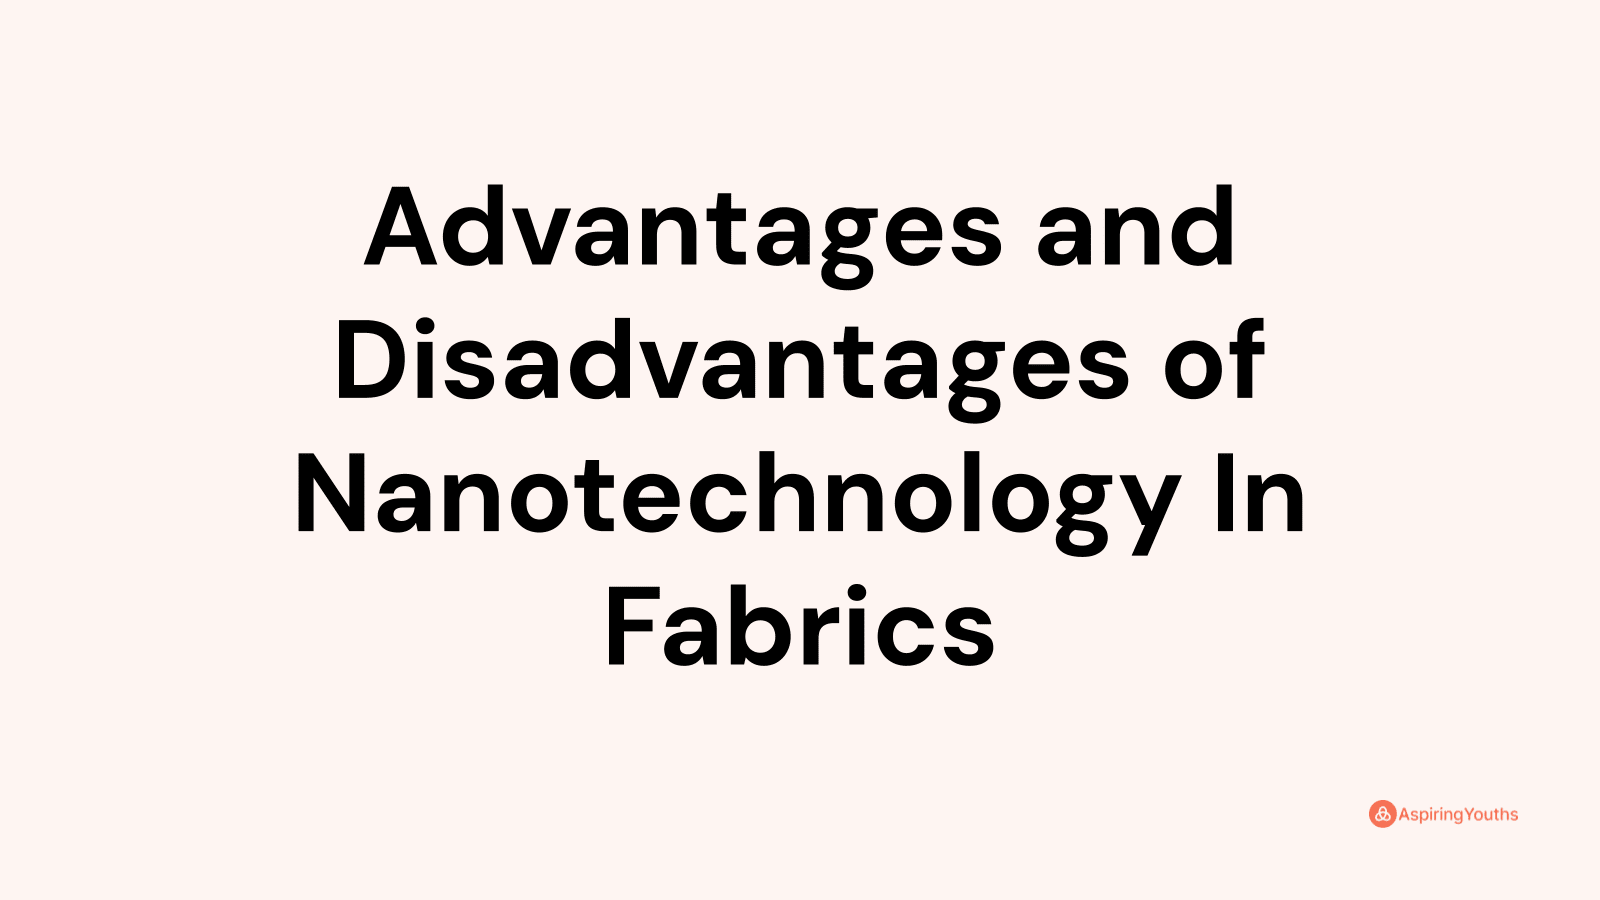 Advantages and disadvantages of Nanotechnology In Fabrics